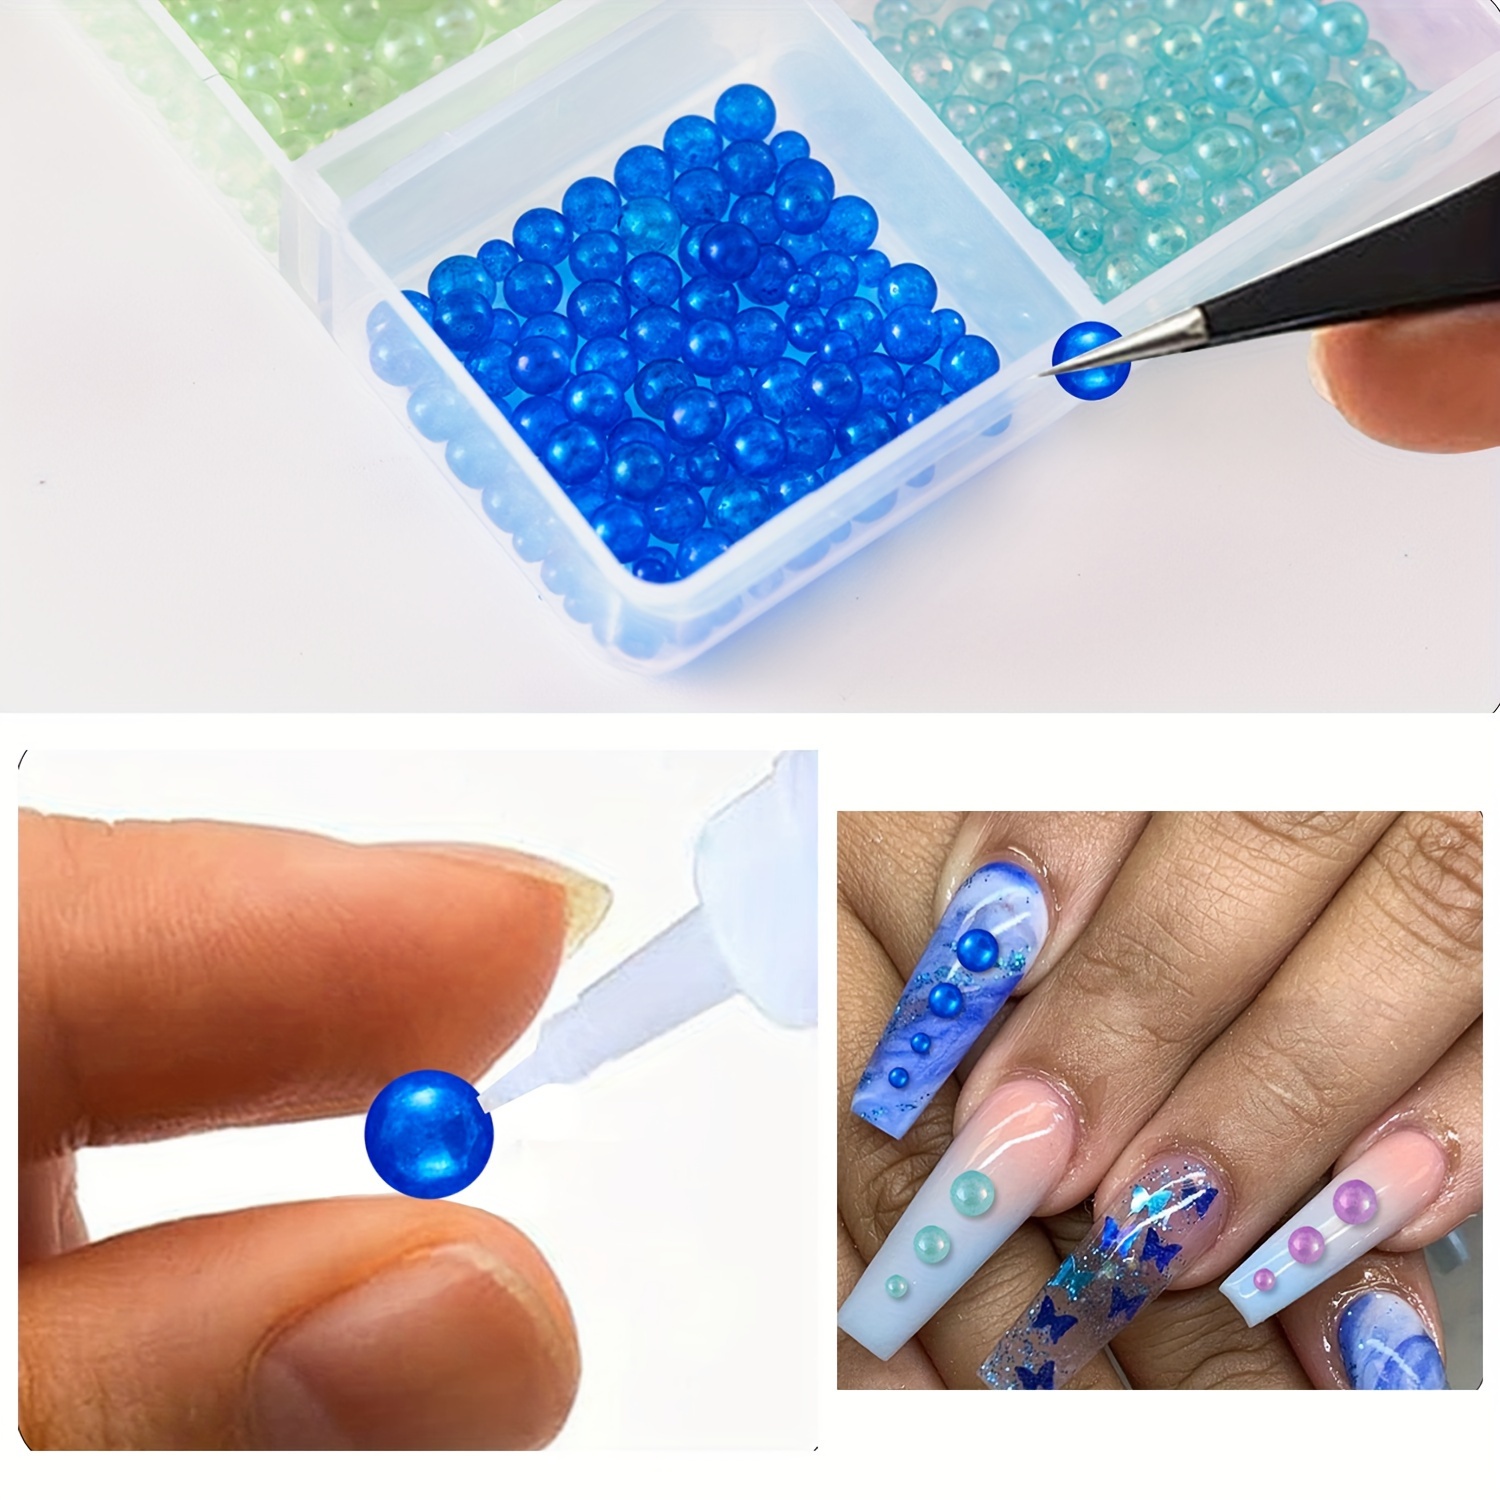 Rhinestones Flatback Round Crystal Glass Rhinestones Gems for Crafts Nail Face Art Clothes Shoes Bags DIY - Light Blue